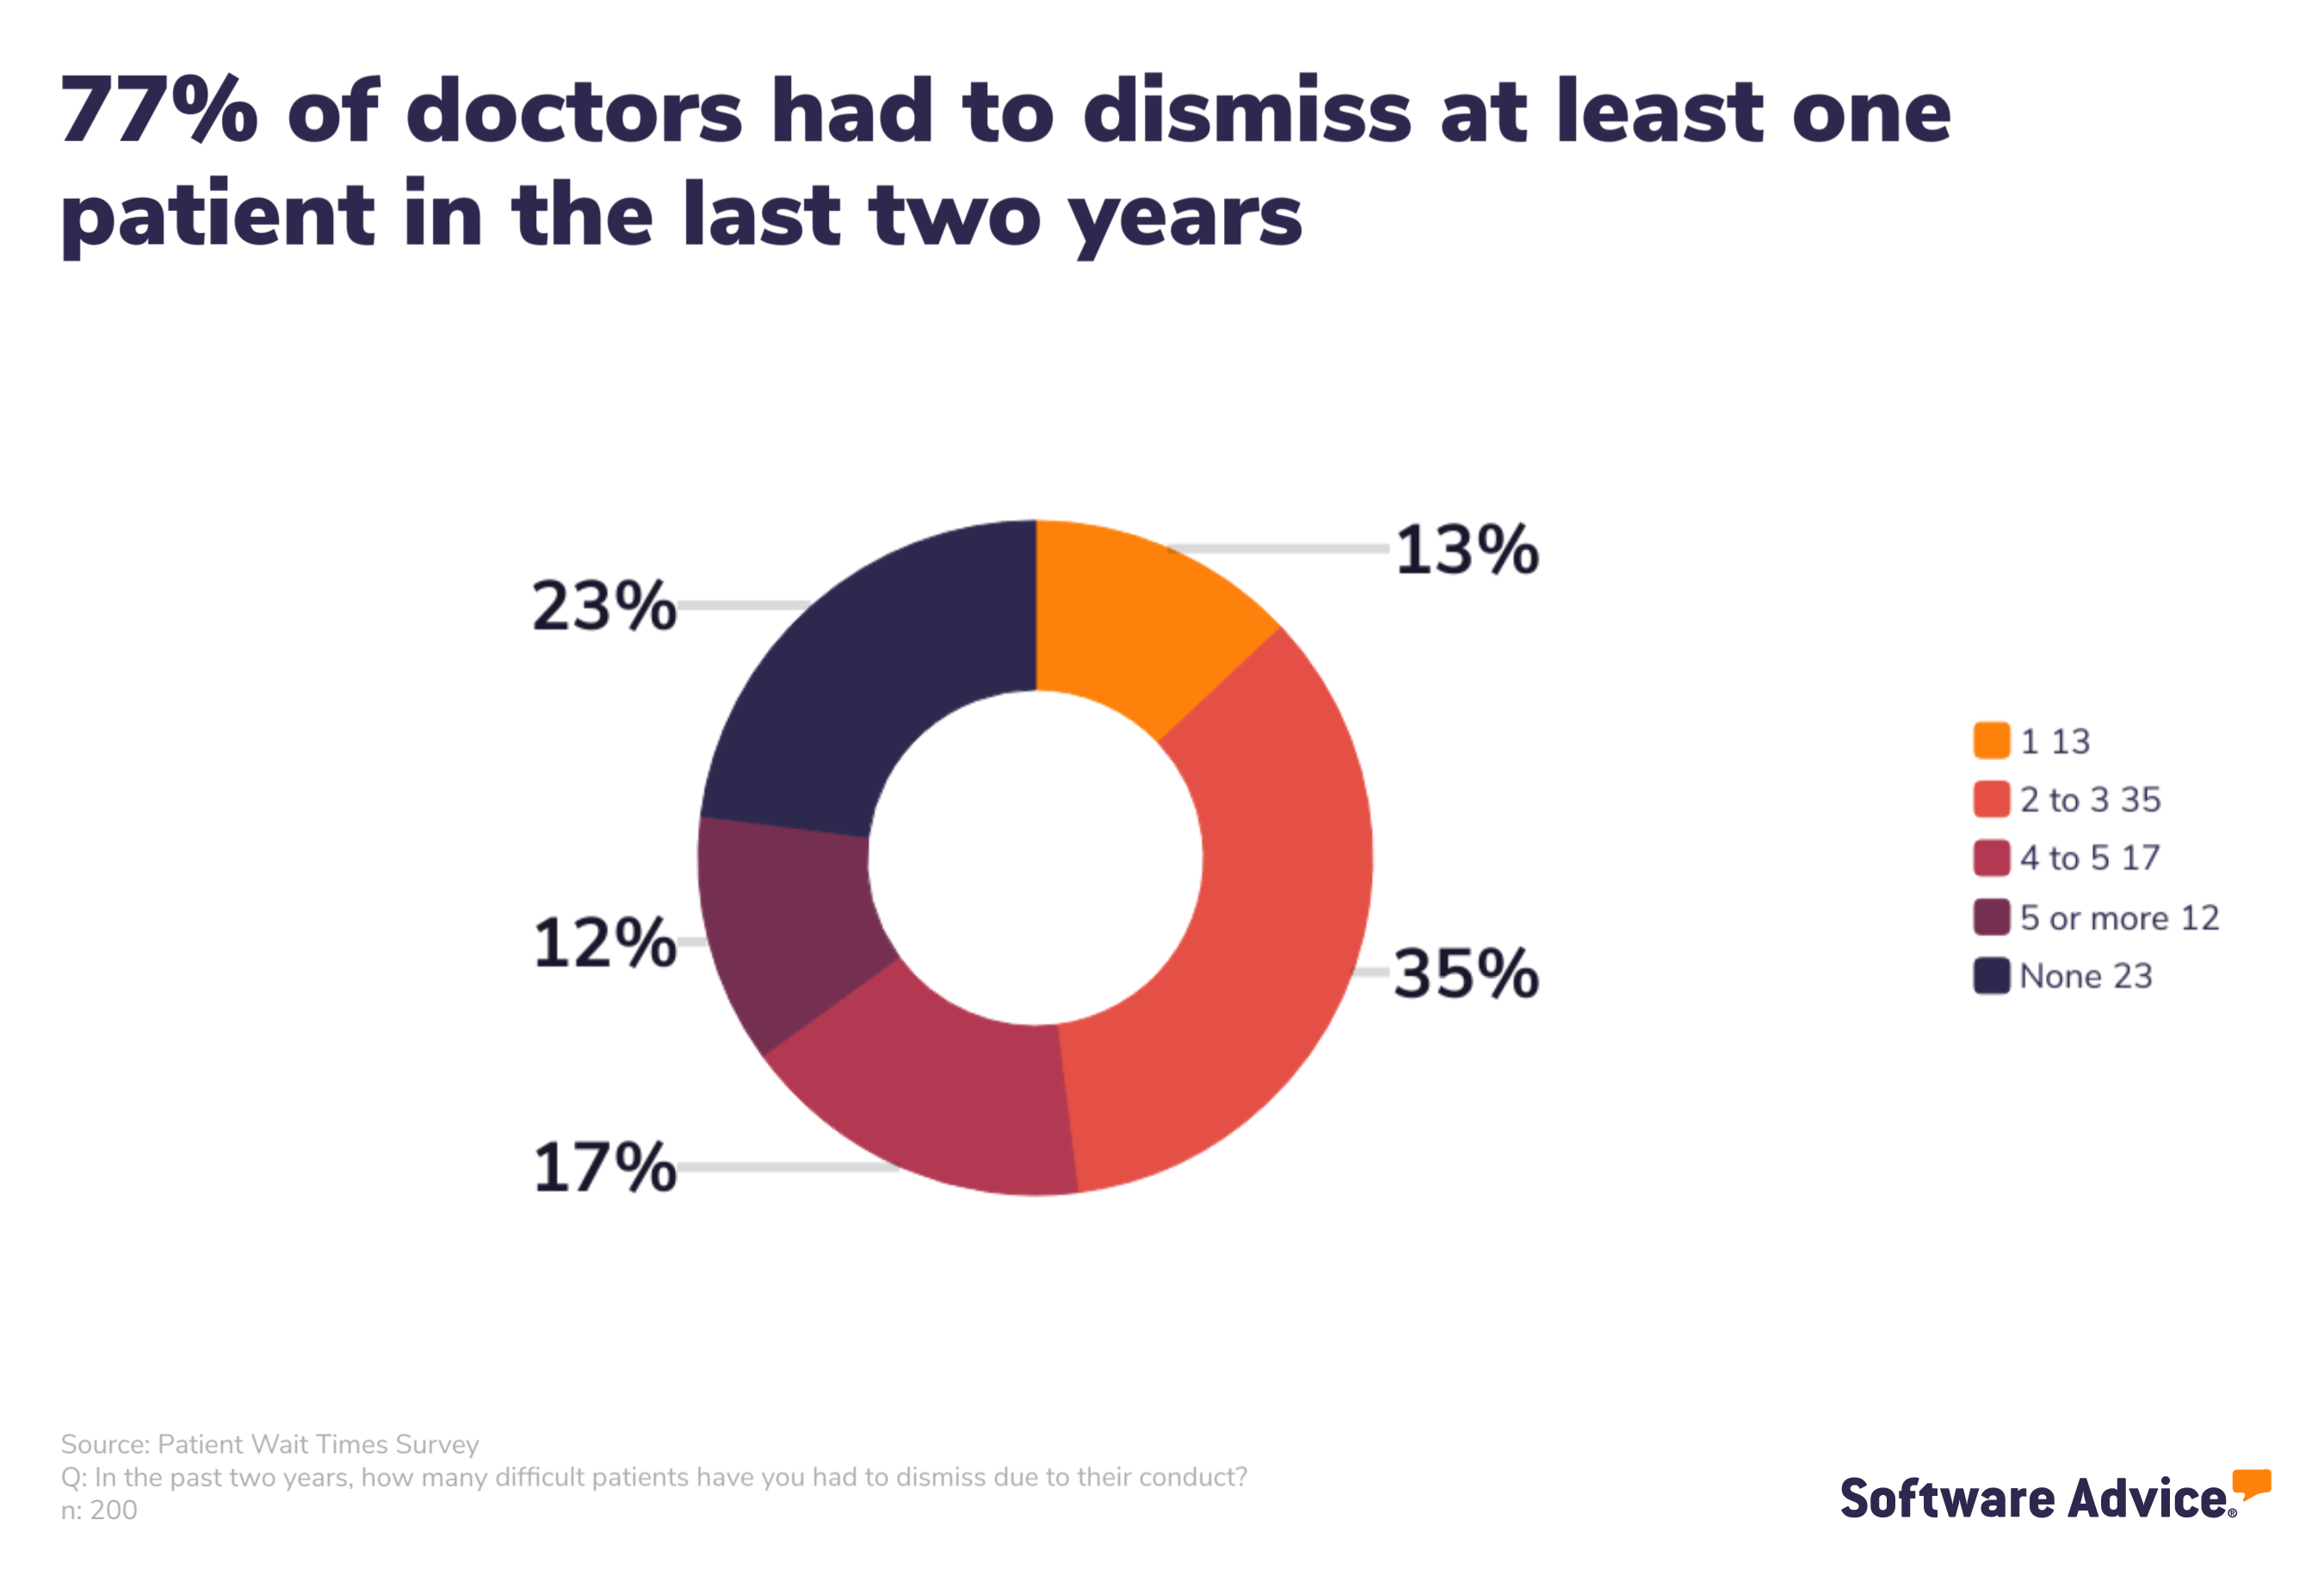 Graph of percentage of doctors who had to dismiss at least one patient in the last two years.